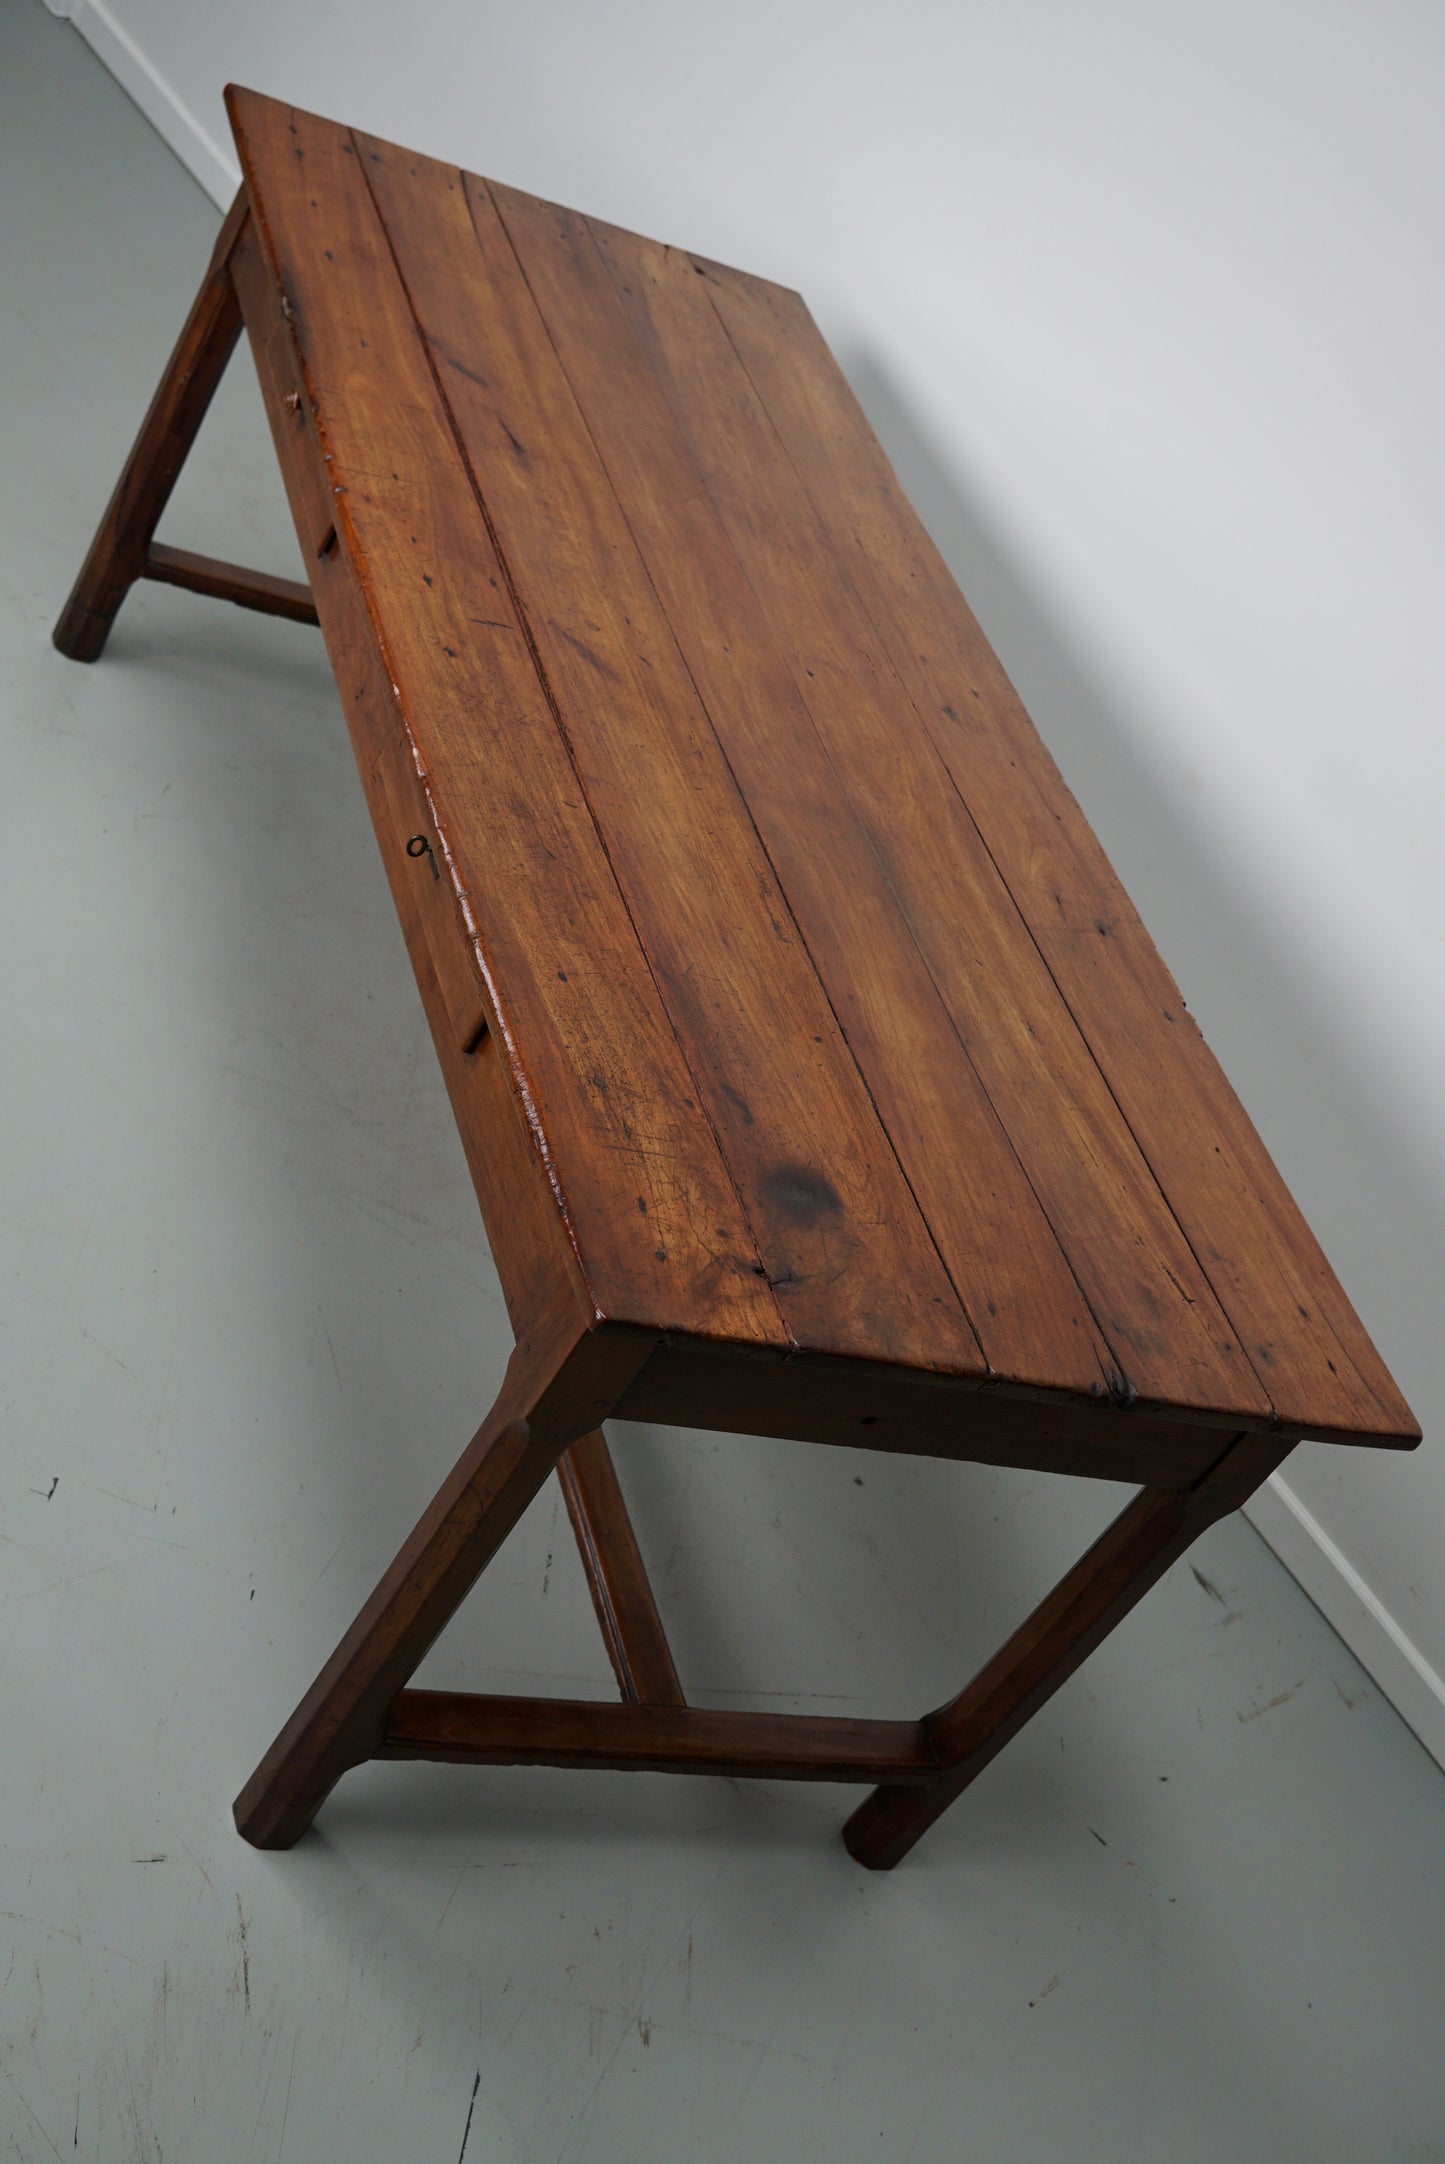 Antique Cherry French Farmhouse Dining Table, 19th Century